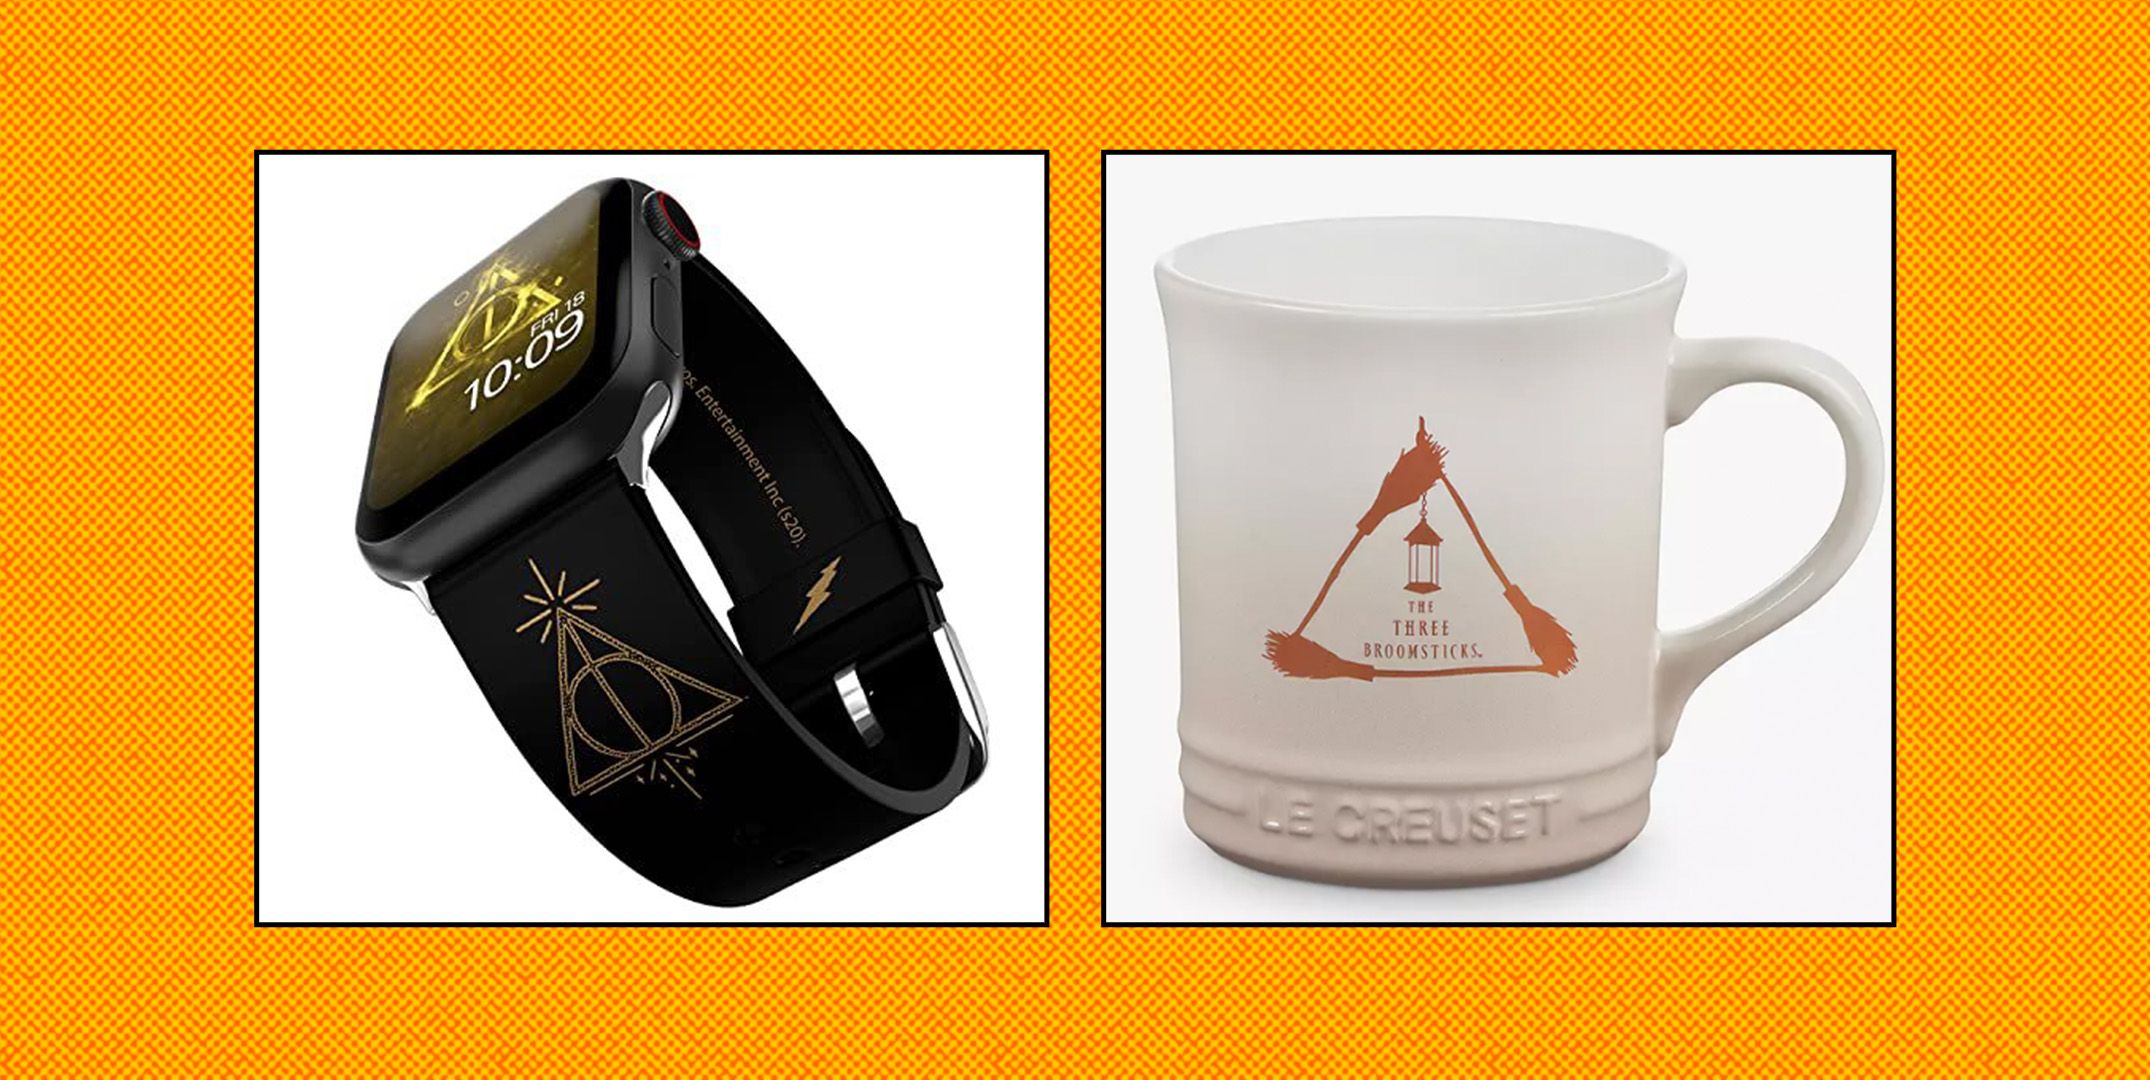 Andre steder Medicinsk Robe The best Harry Potter gifts for the HP fans in your life